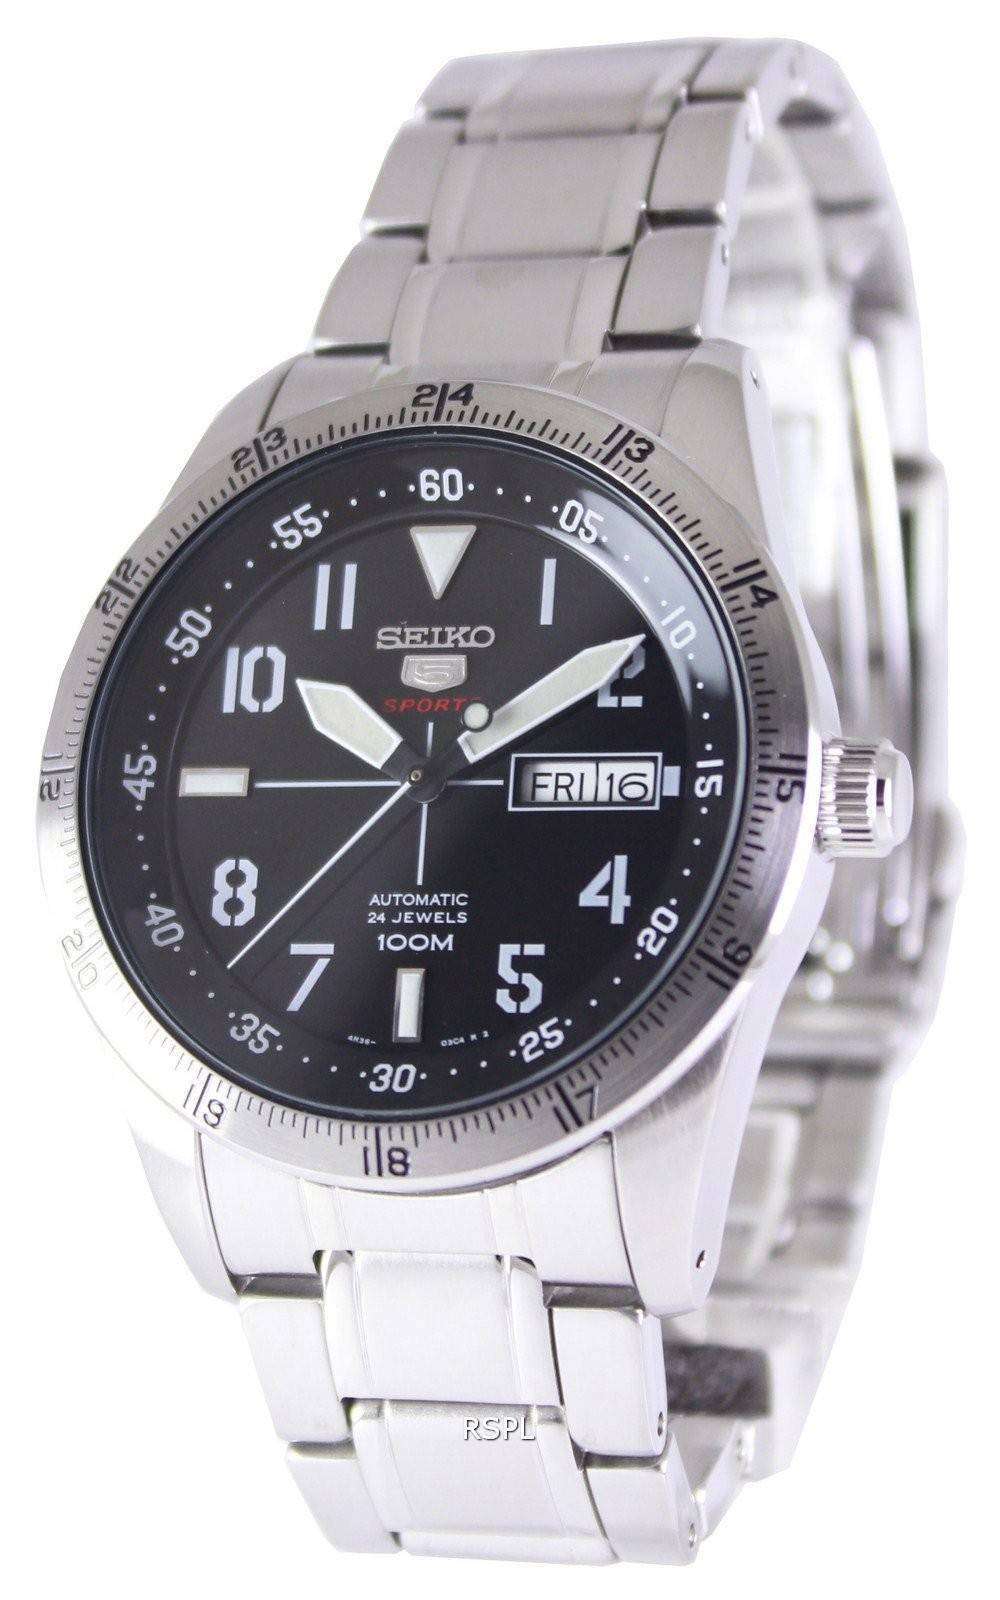 Seiko 5 Sports Automatic 24 Jewels 100M SRP513K1 SRP513K Men's Watch - CityWatches.co.uk